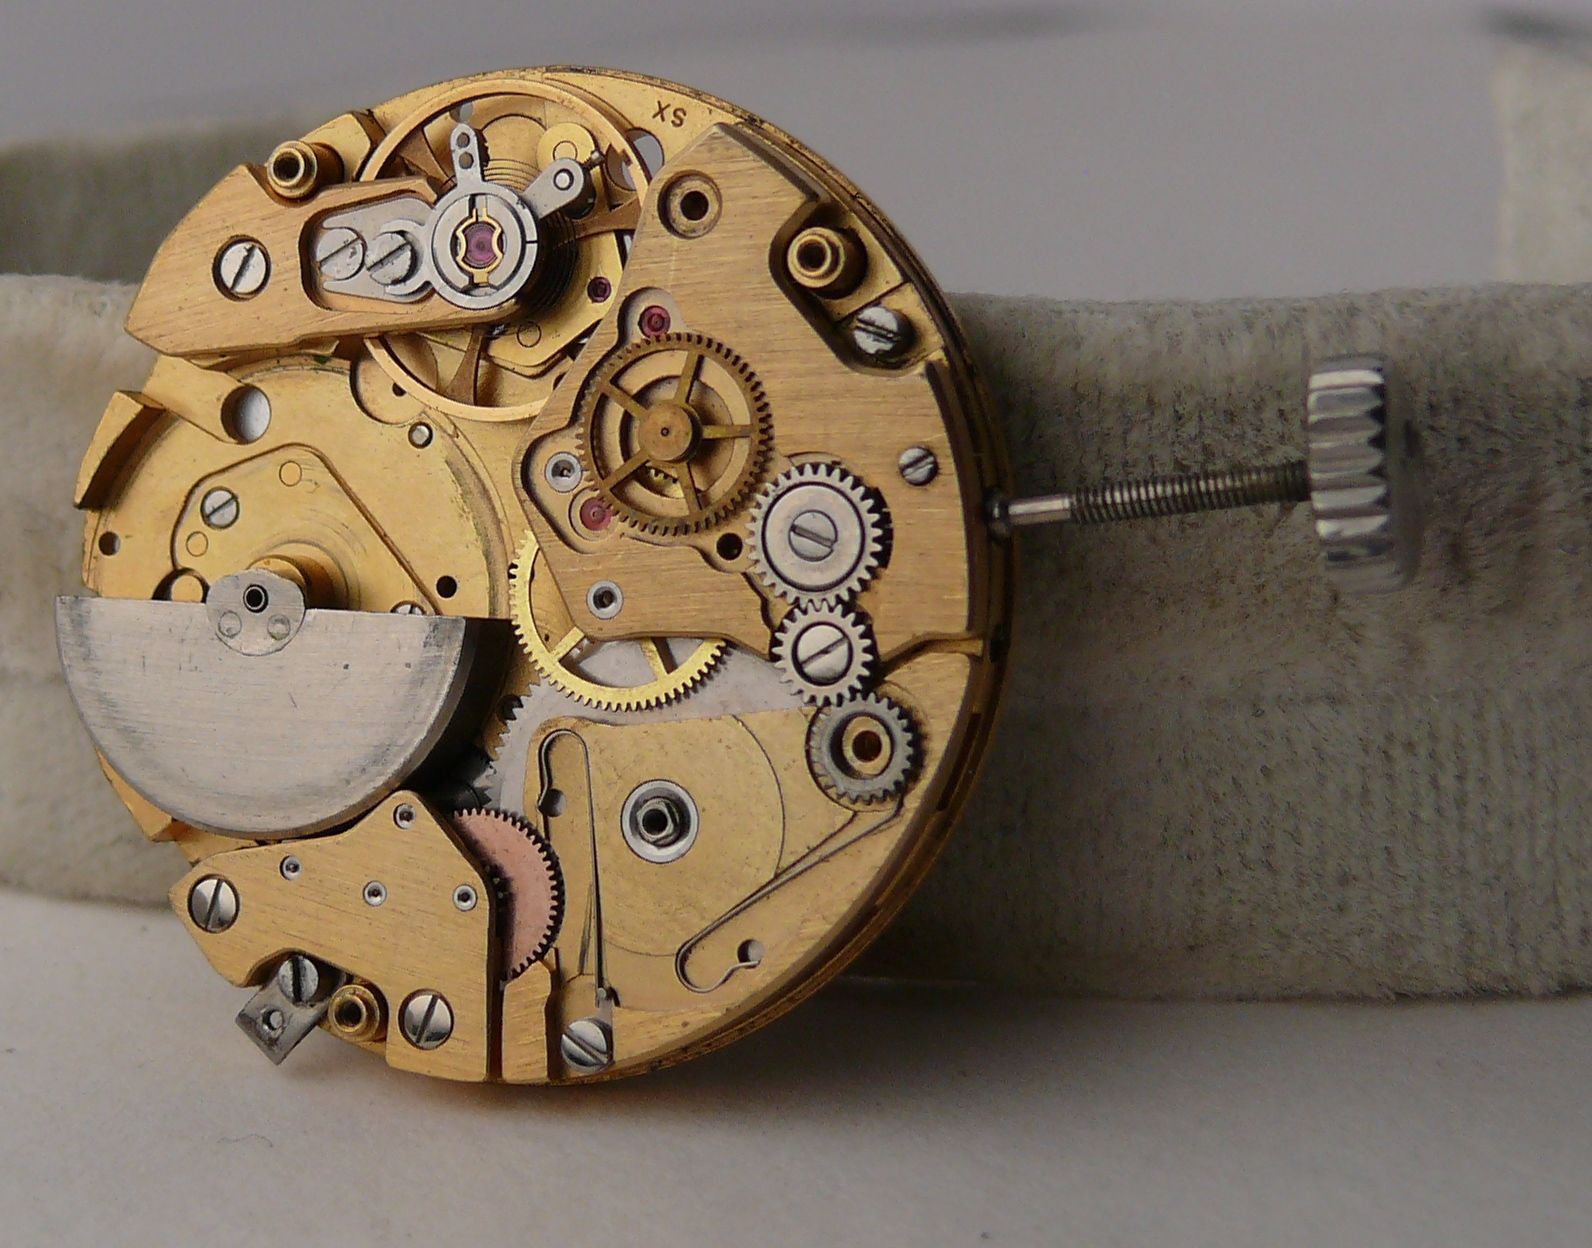 Incomplete Vintage Breitling calibre 12 Movement for Parts projects or restorations - Image 2 of 3